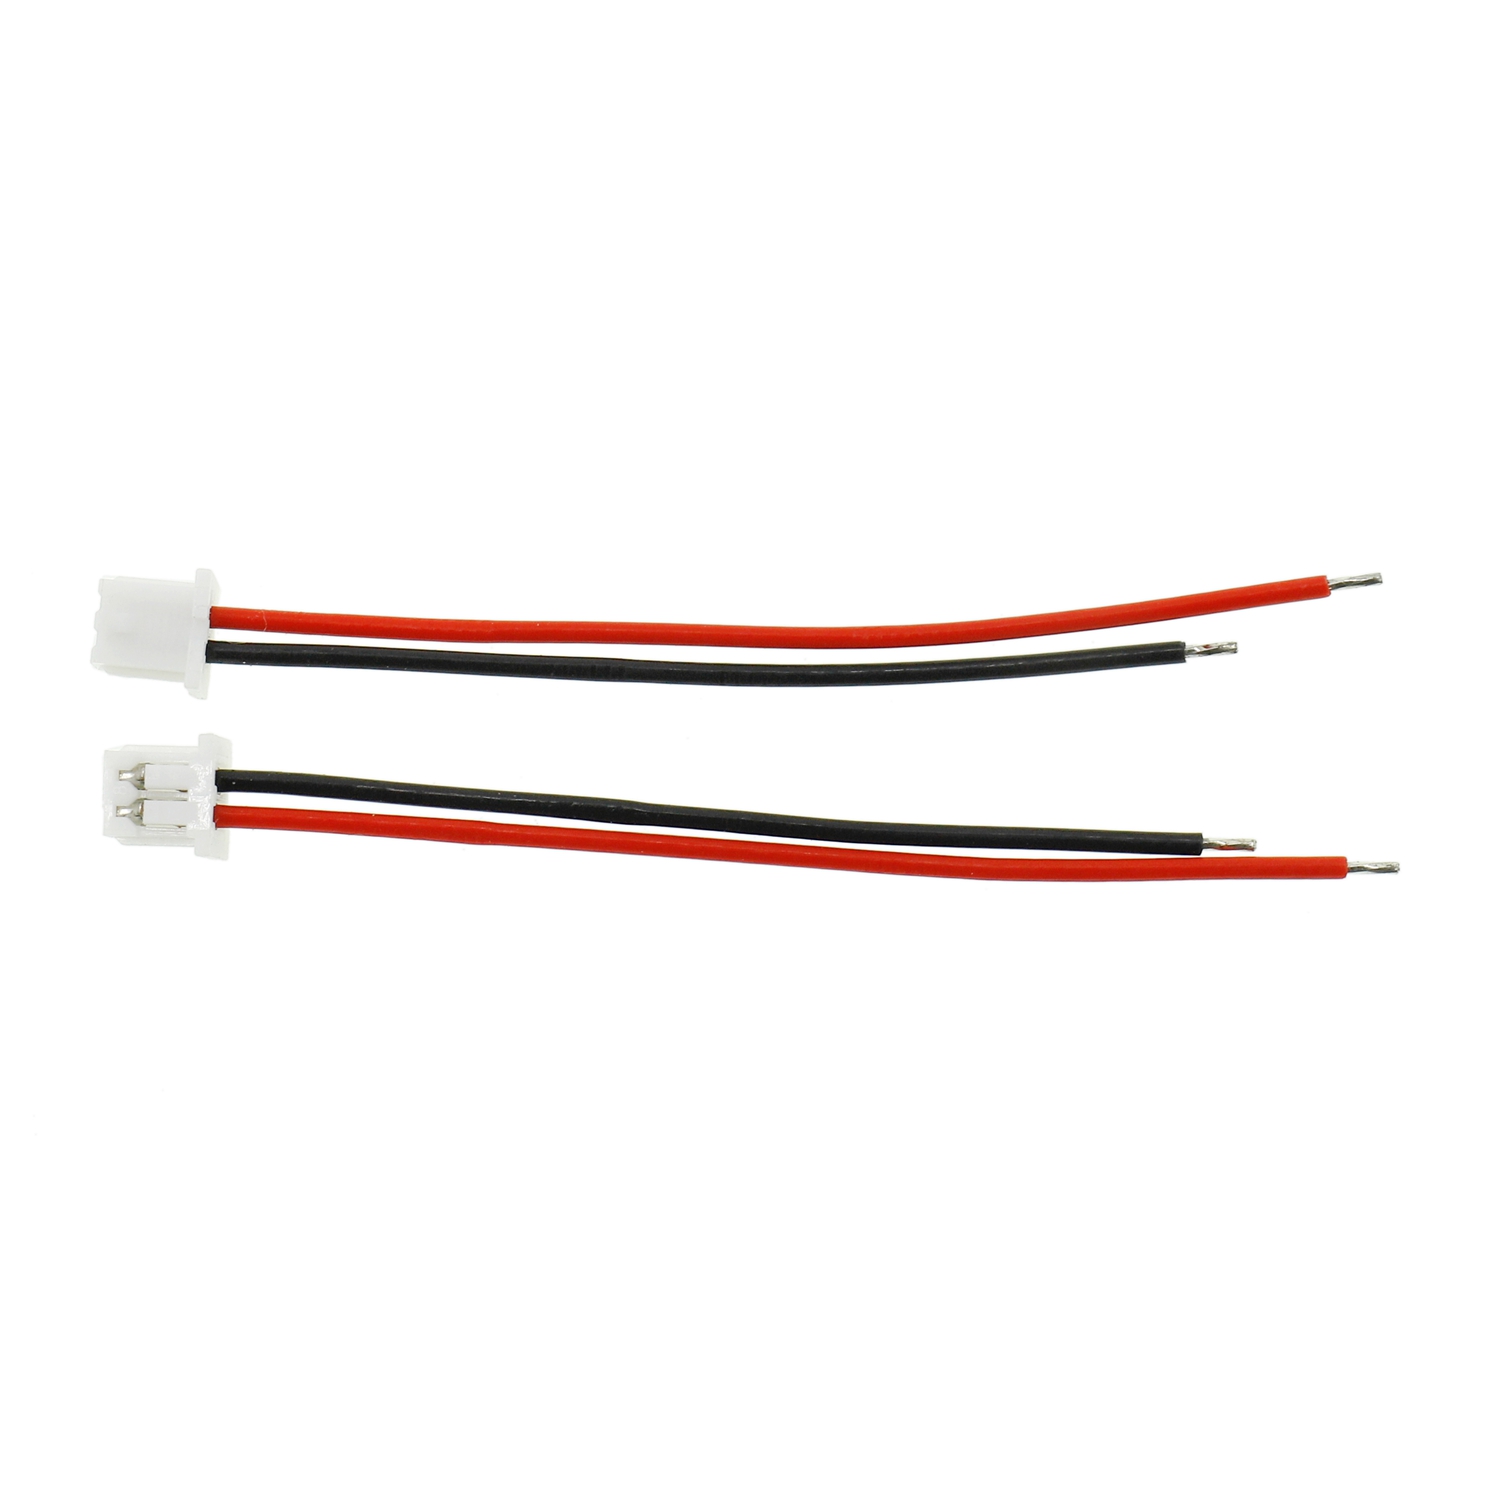 PVC Female to Male Terminal PH4.5mm 2PIN OEM Cable Assembly 